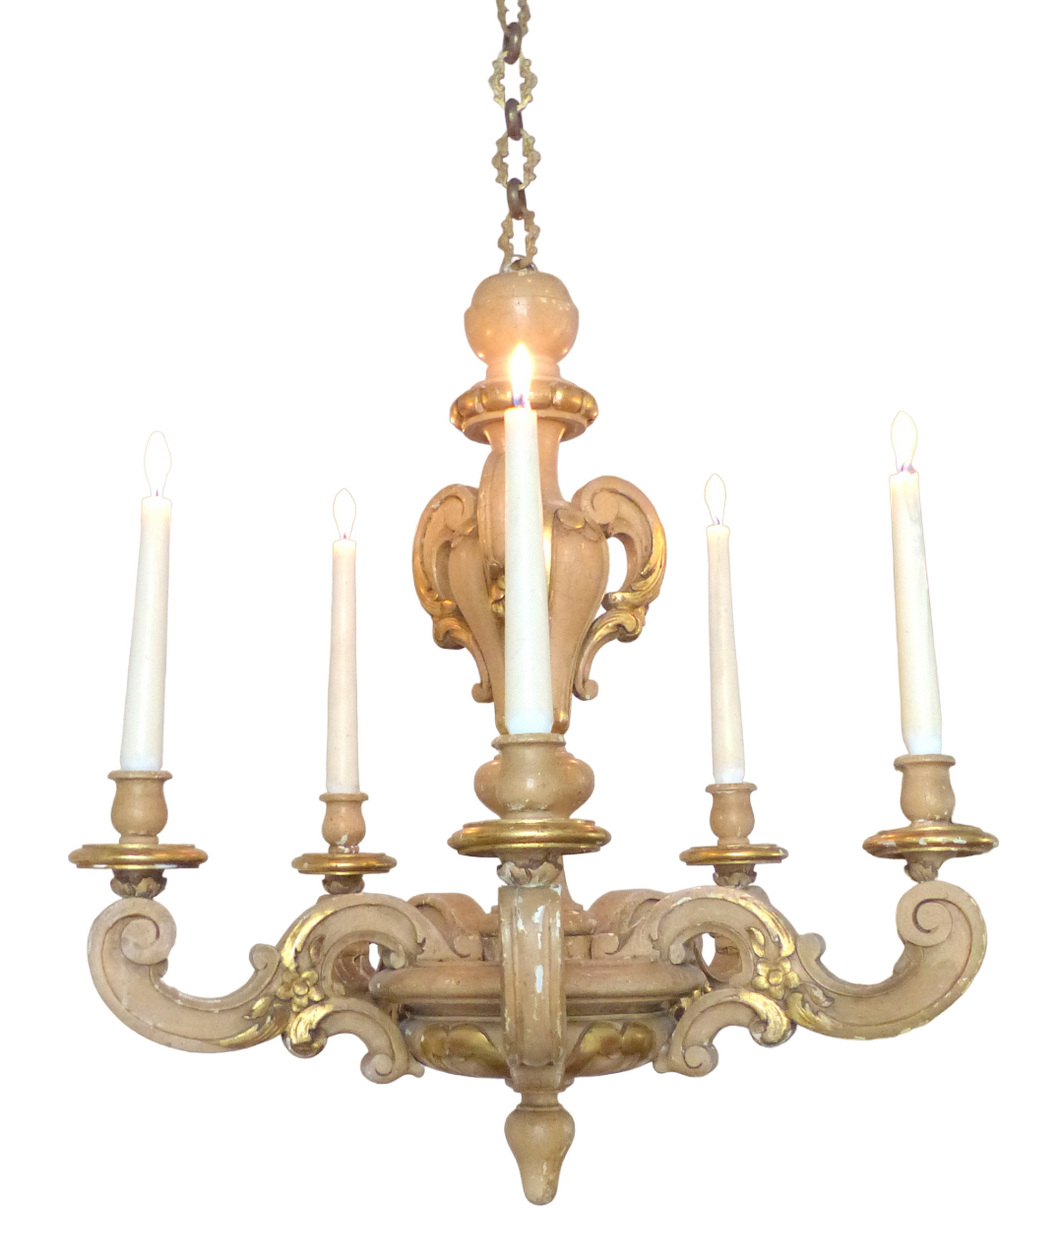 Gorgeous Vintage Italian 5 Arms Gilded Carved Wood Chandelier Candlestick 1950